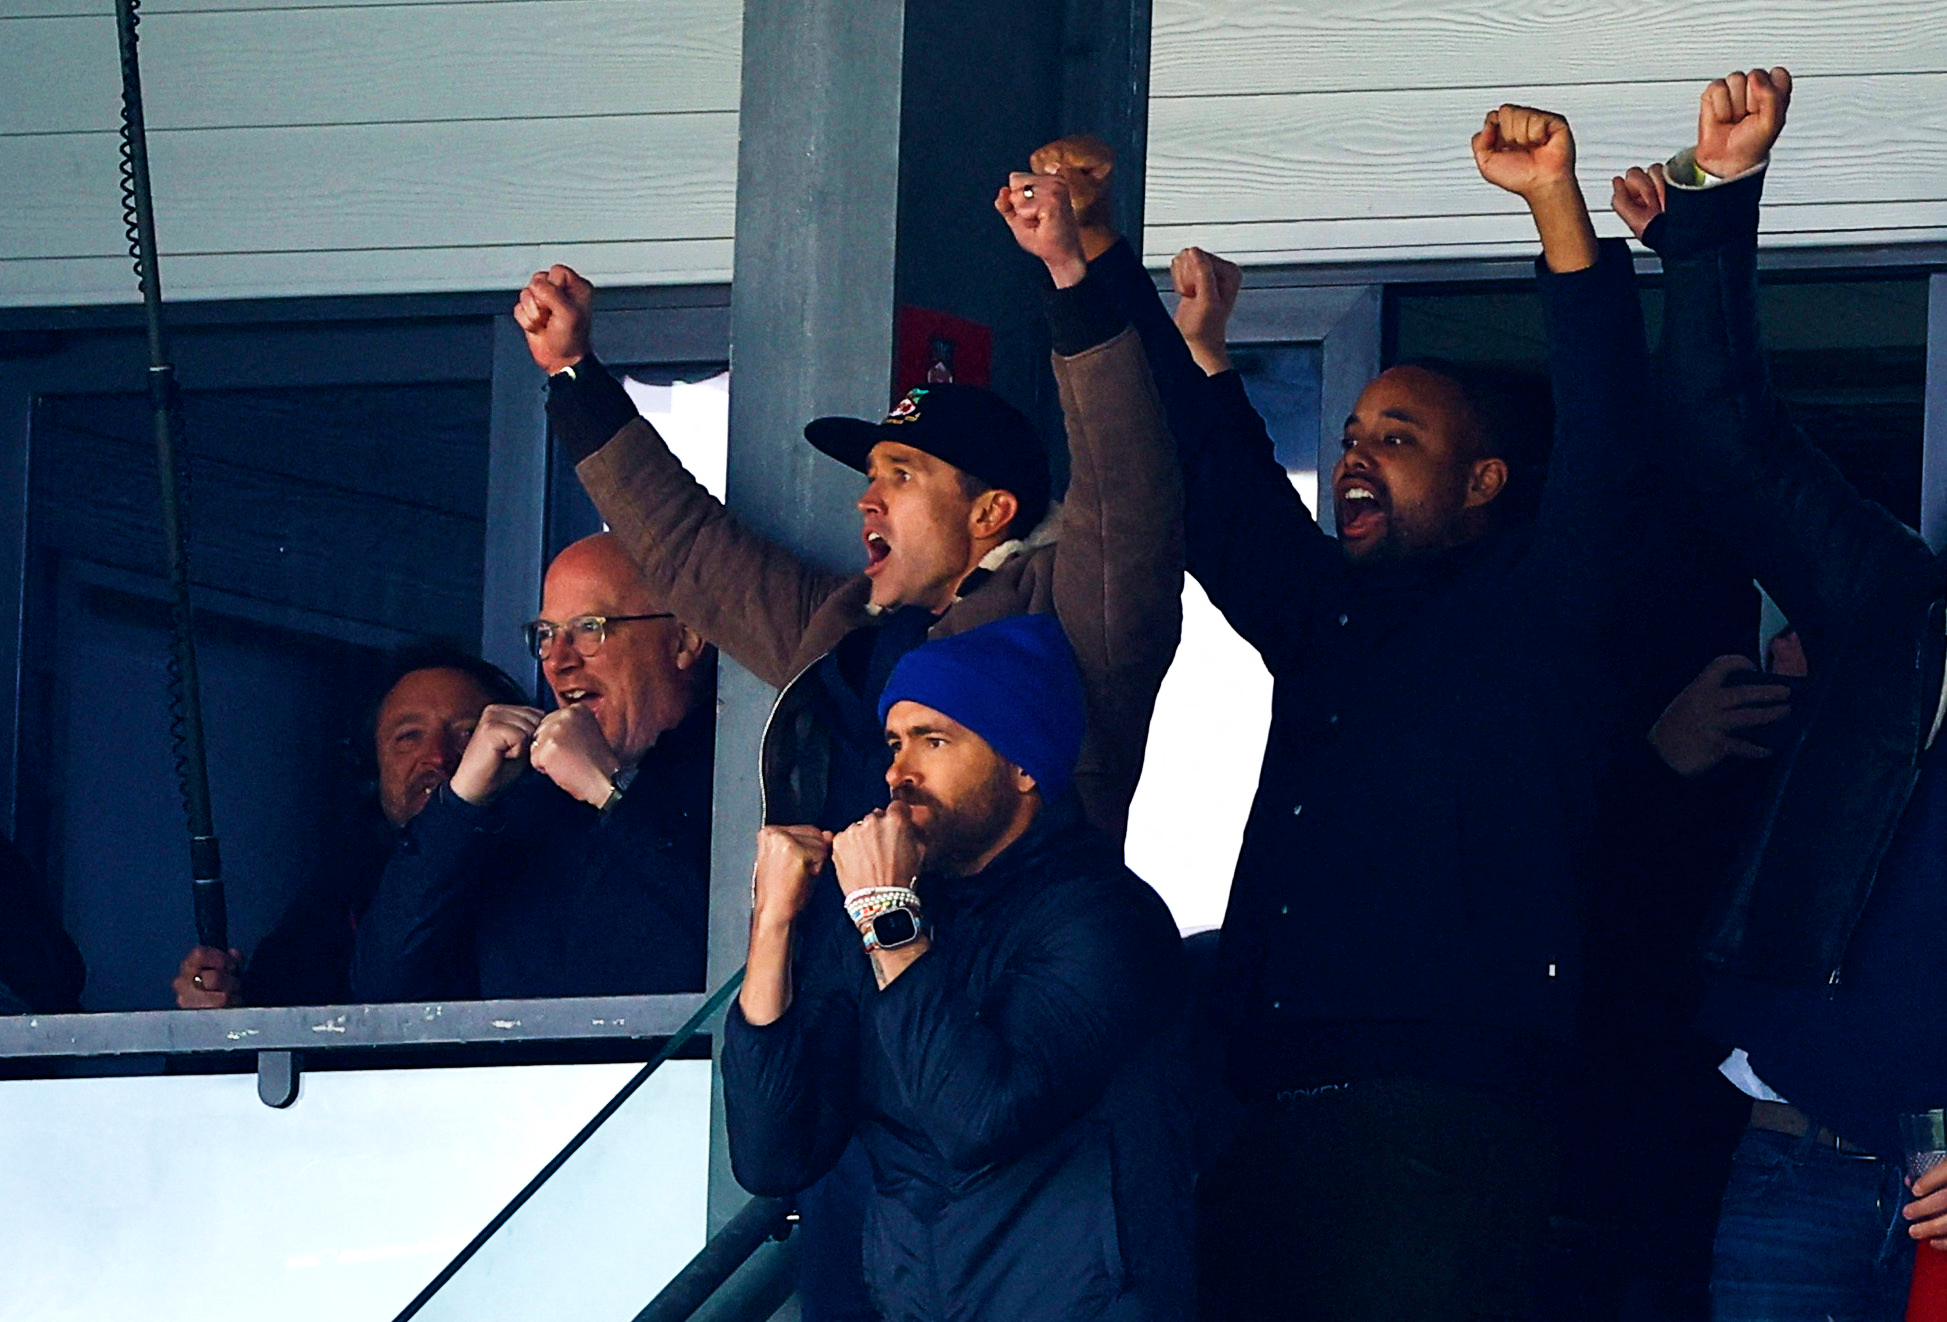 Ryan Reynolds, front, and co-owner Rob McElhenney celebrate victory